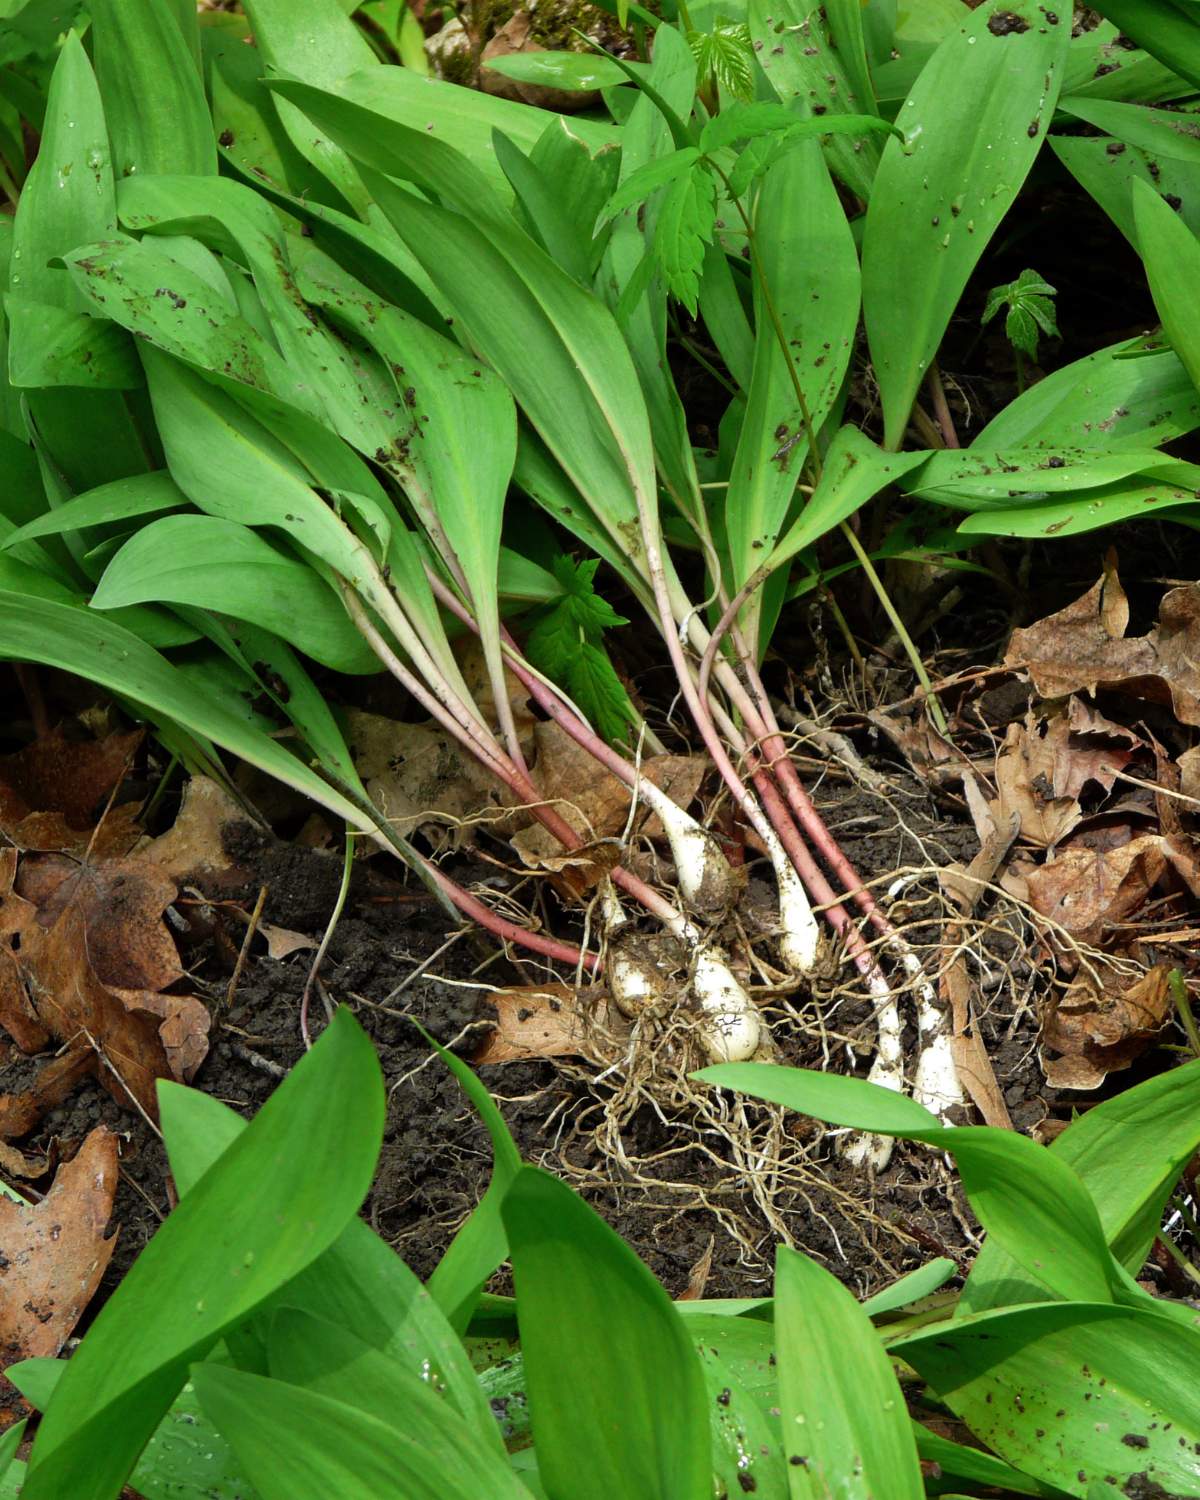 Wild leeks (ramps) just picked out of the ground.